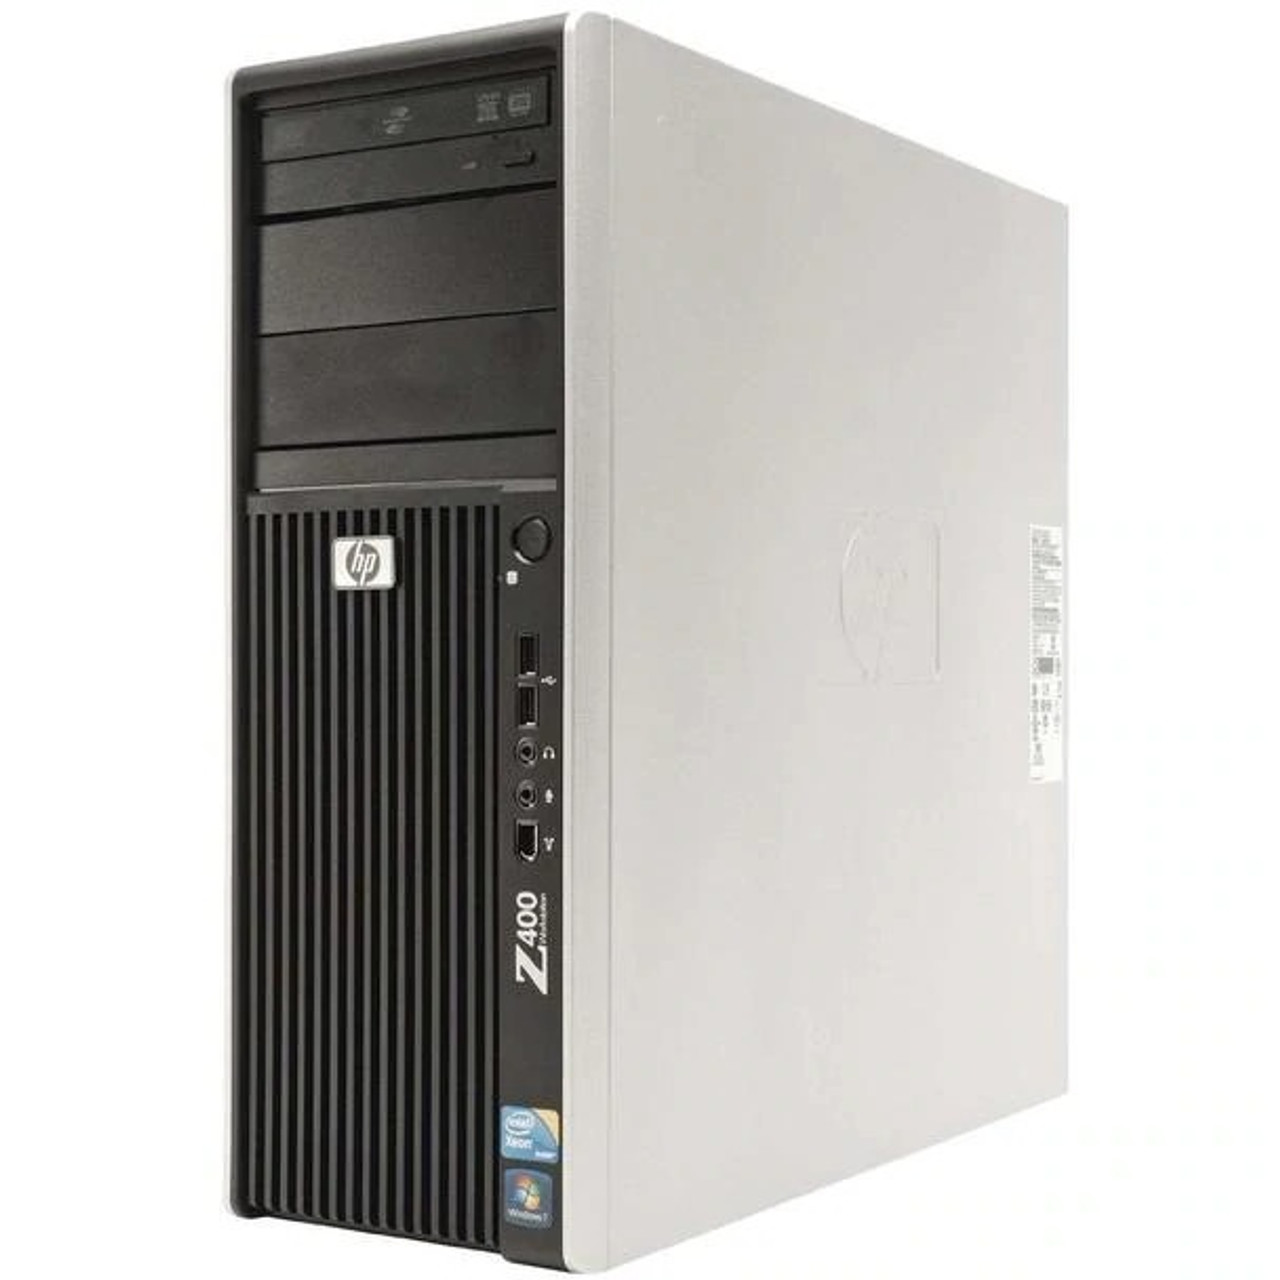 HP Z400 8GB Computers - Windows 10 for Less | Build Your Workstation